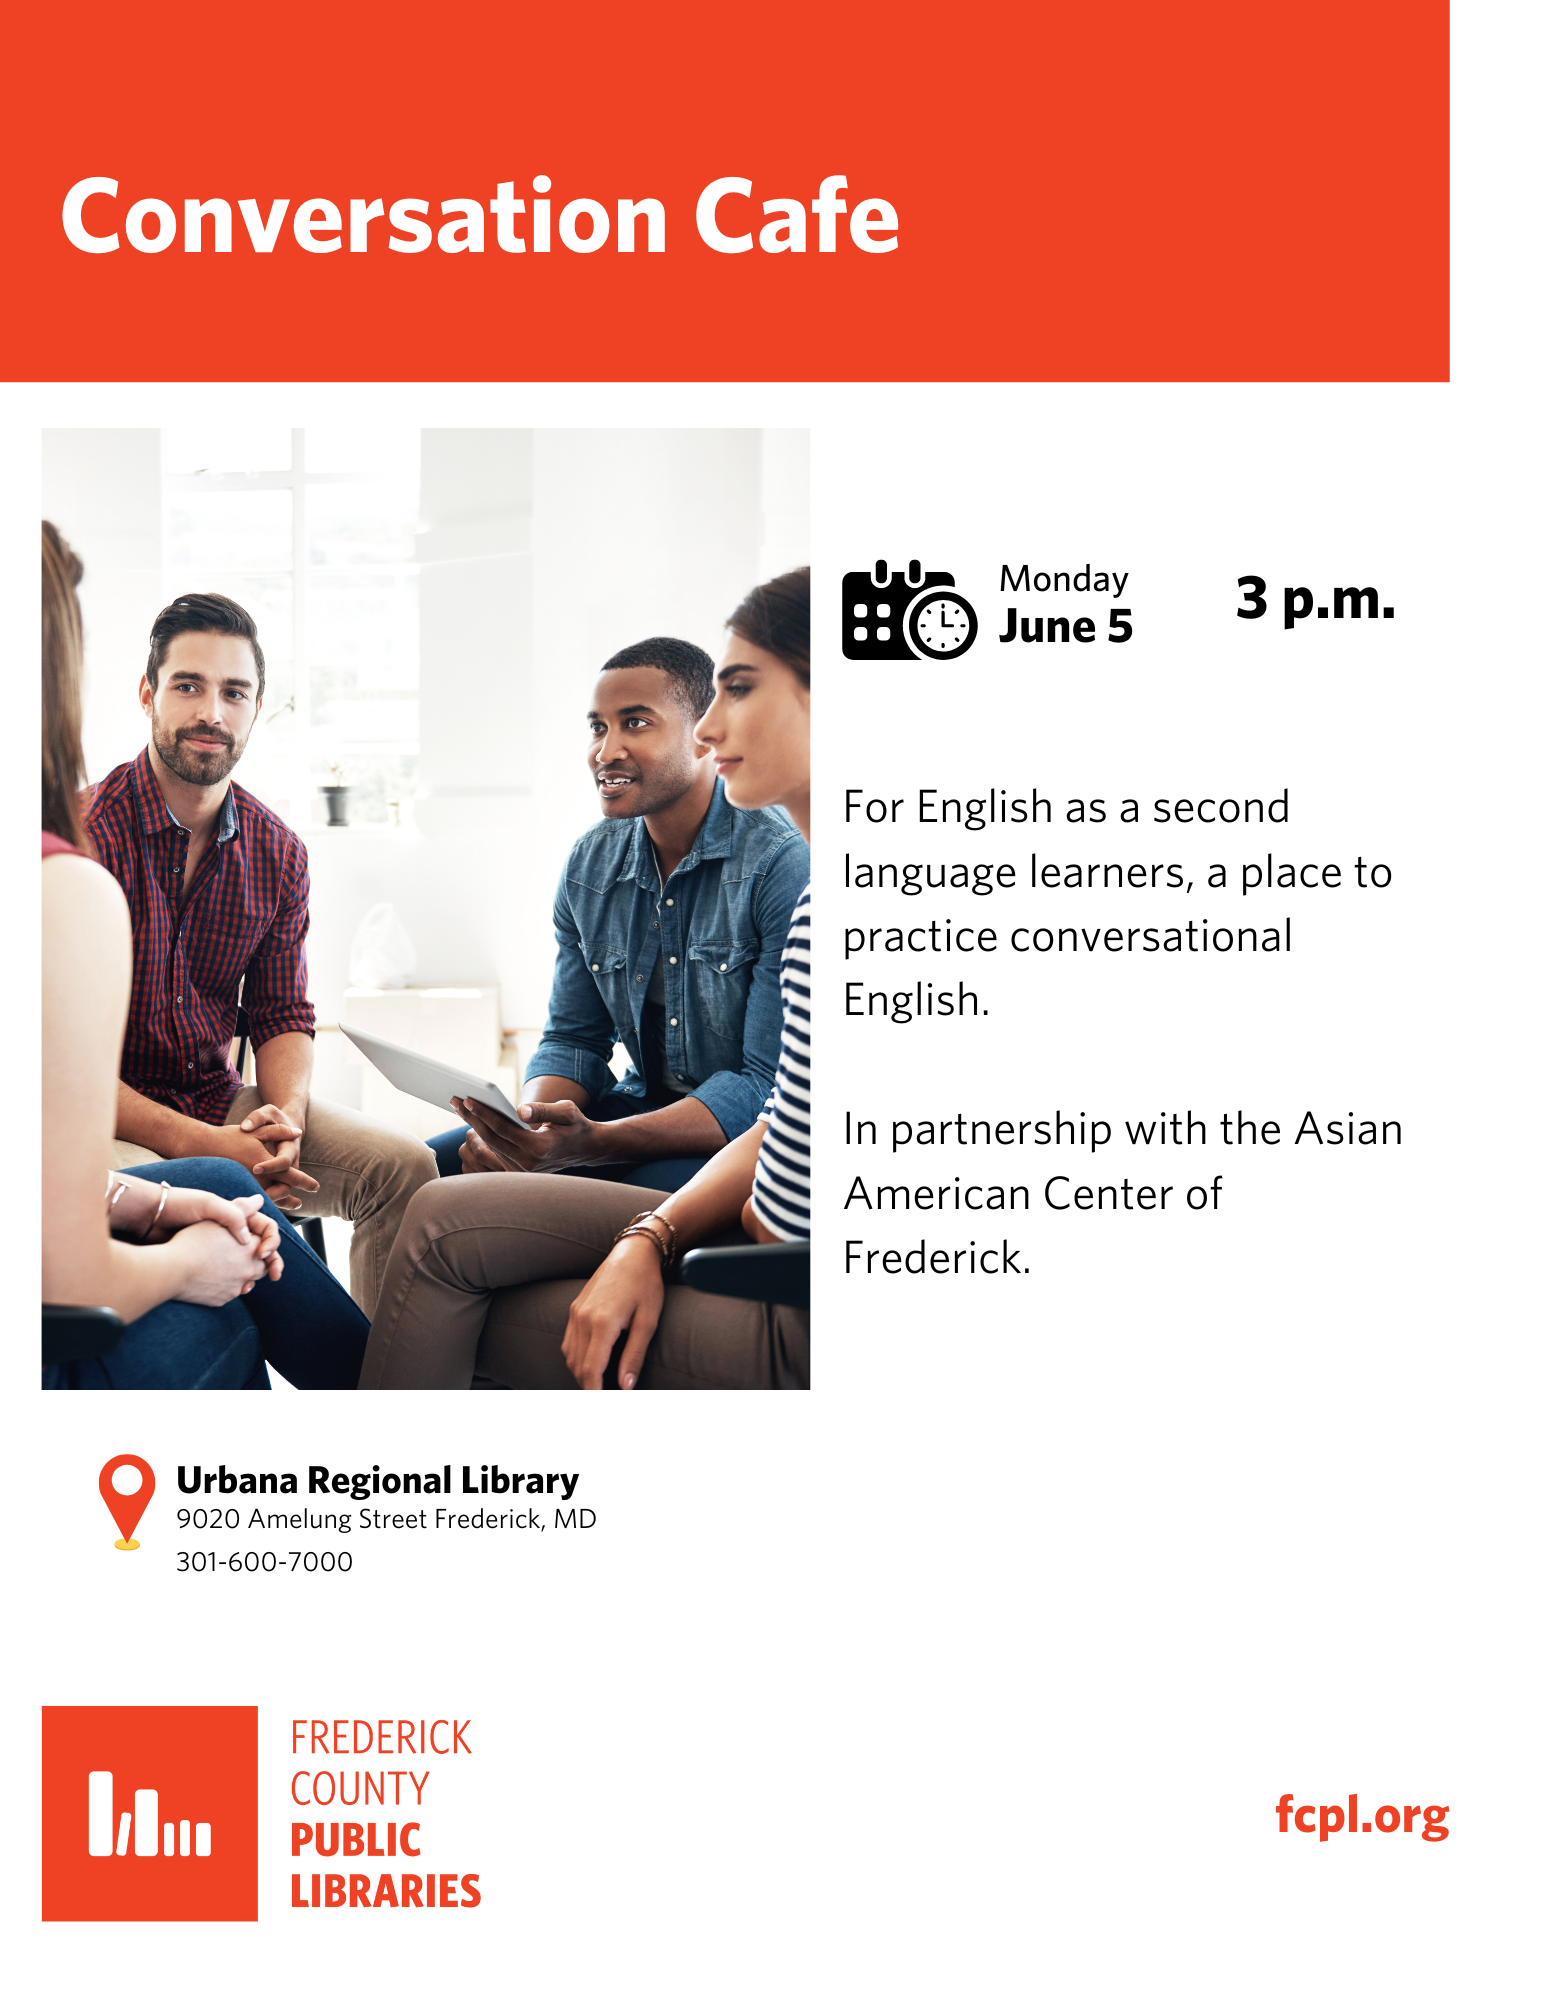 Group of people talking. Conversation Cafe Program for English as a Second Language Learners. Hosted by the Asian American Center of Frederick, June 5th at 3:00pm